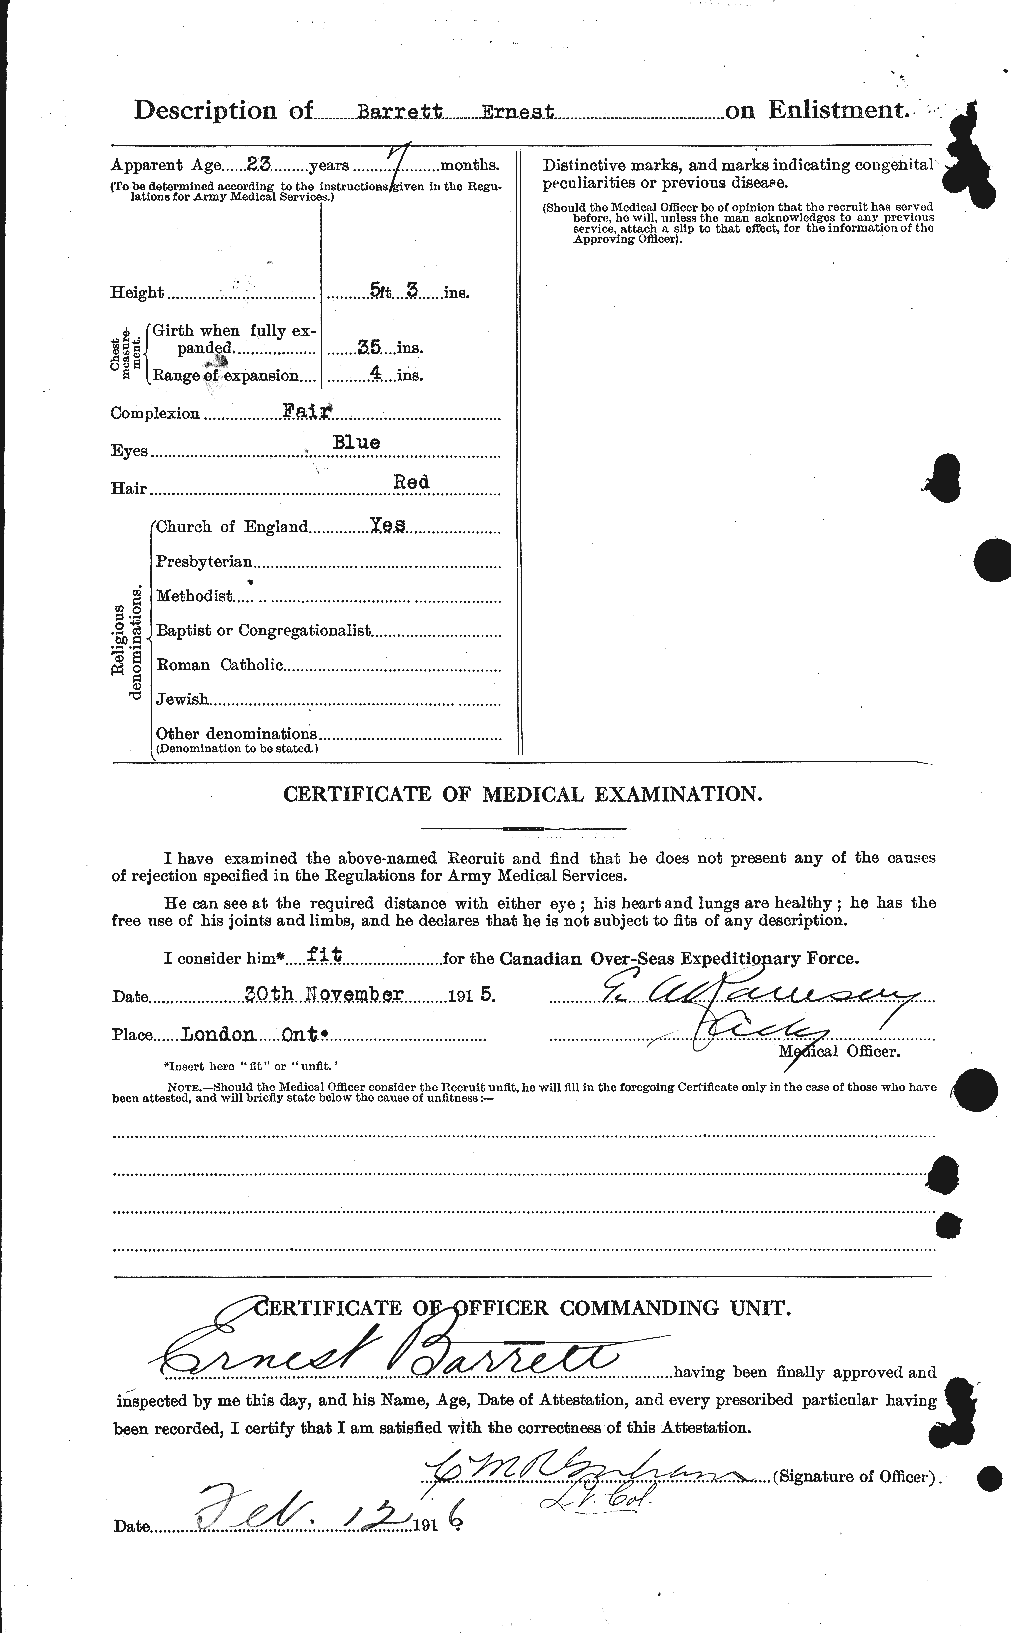 Personnel Records of the First World War - CEF 220350b